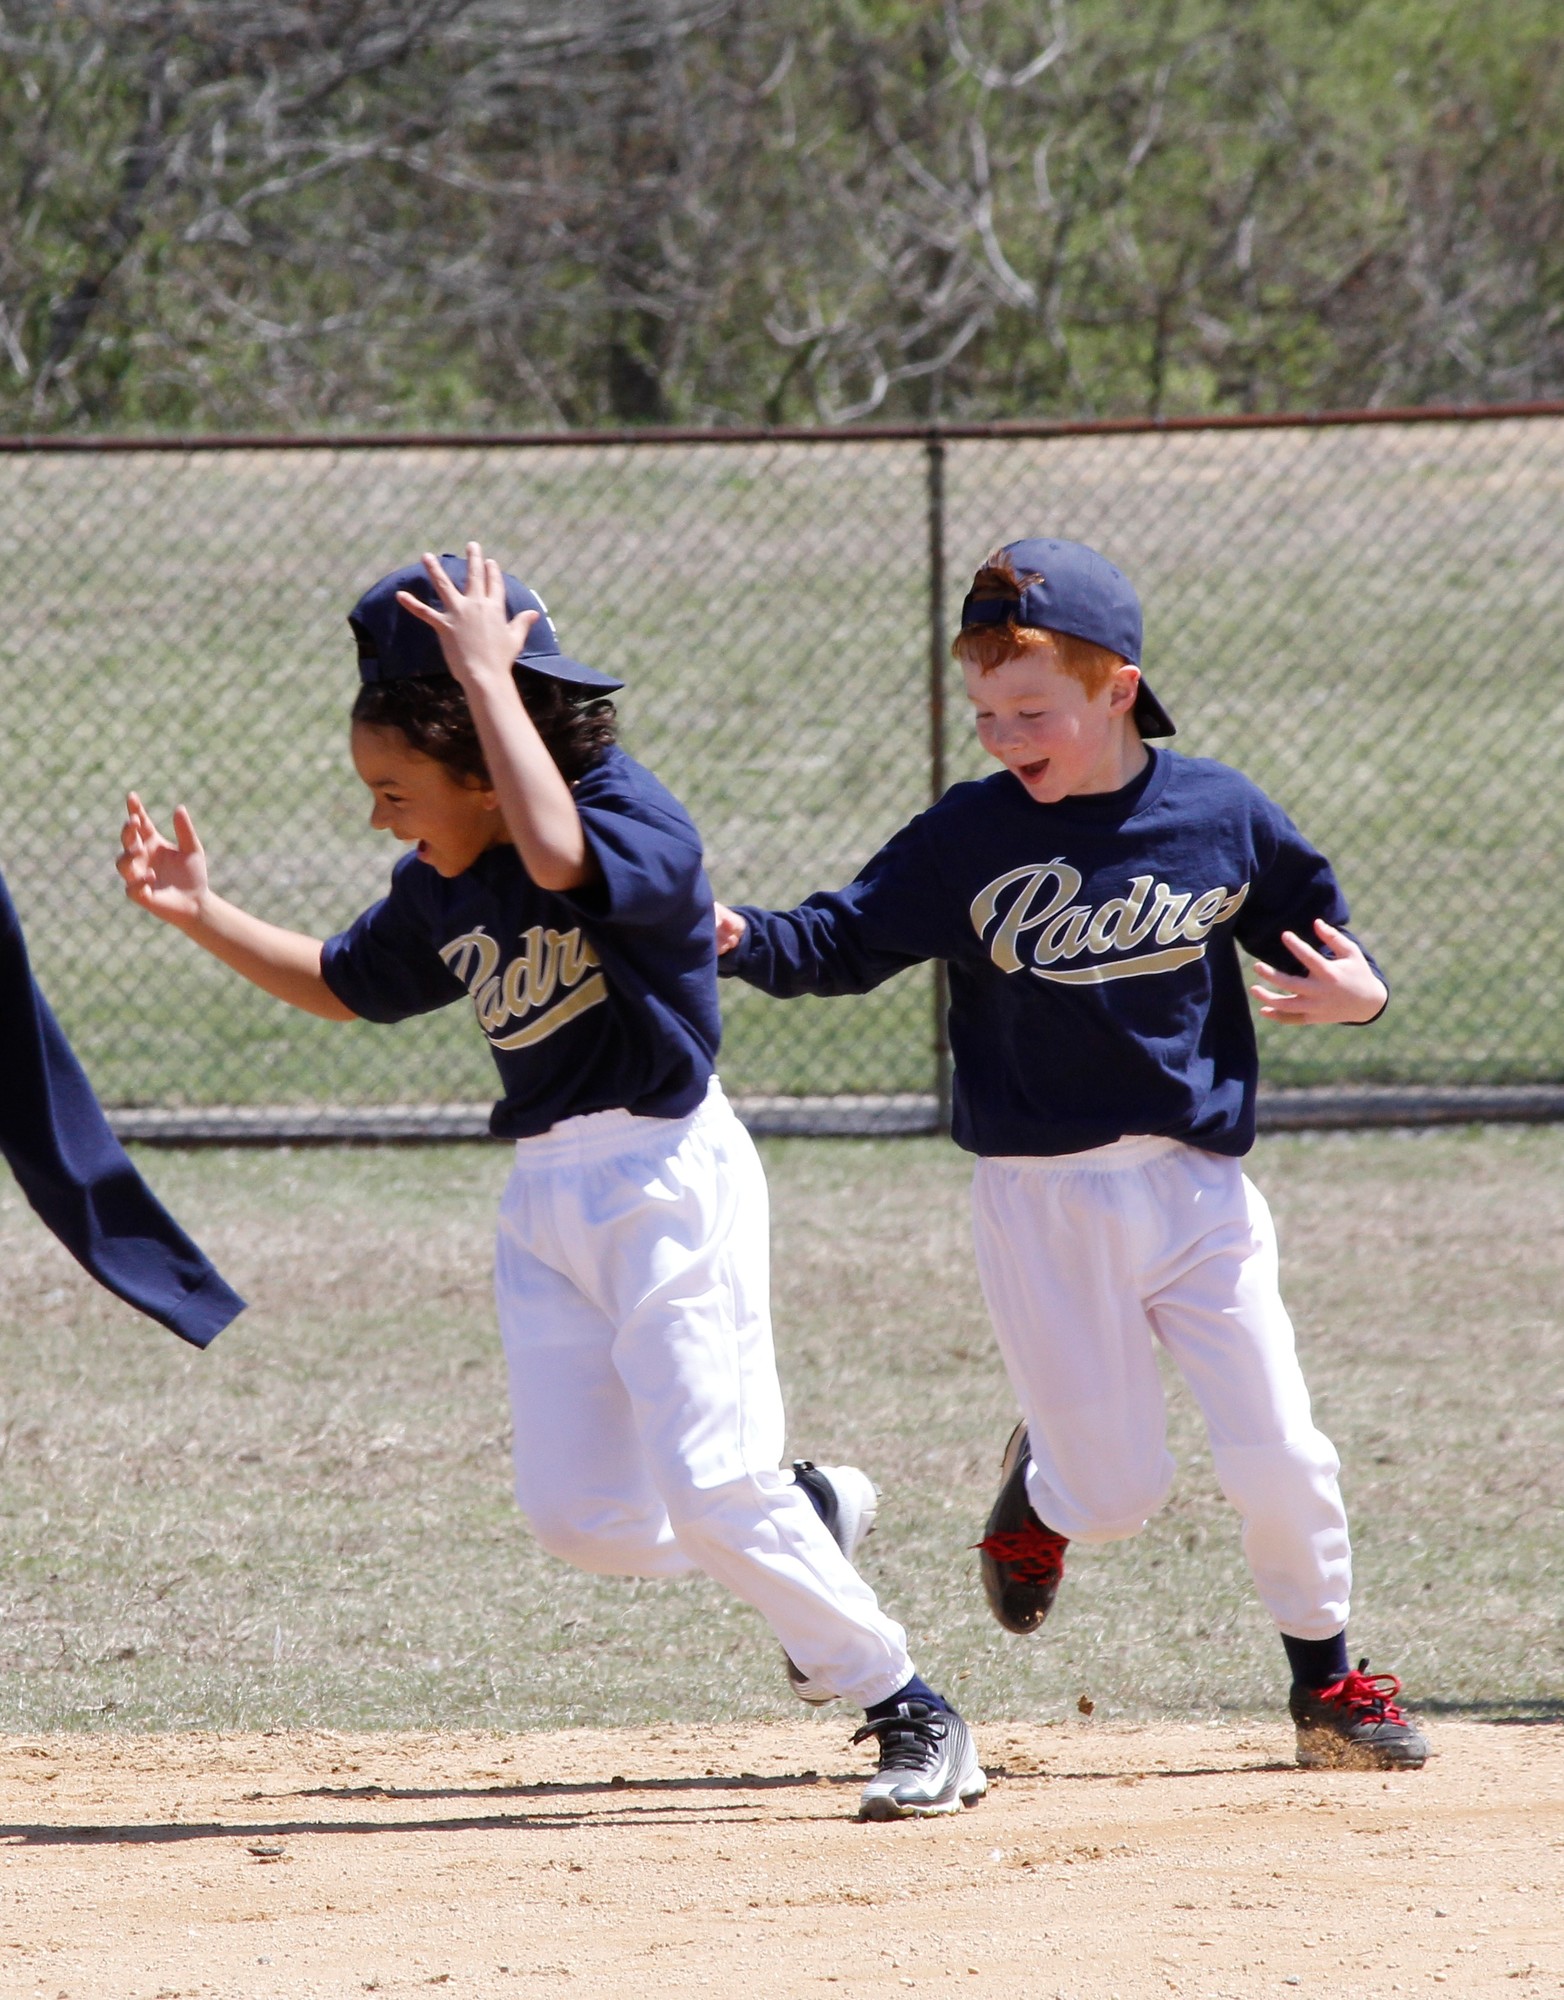 Little League season tosses first pitch, Herald Community Newspapers